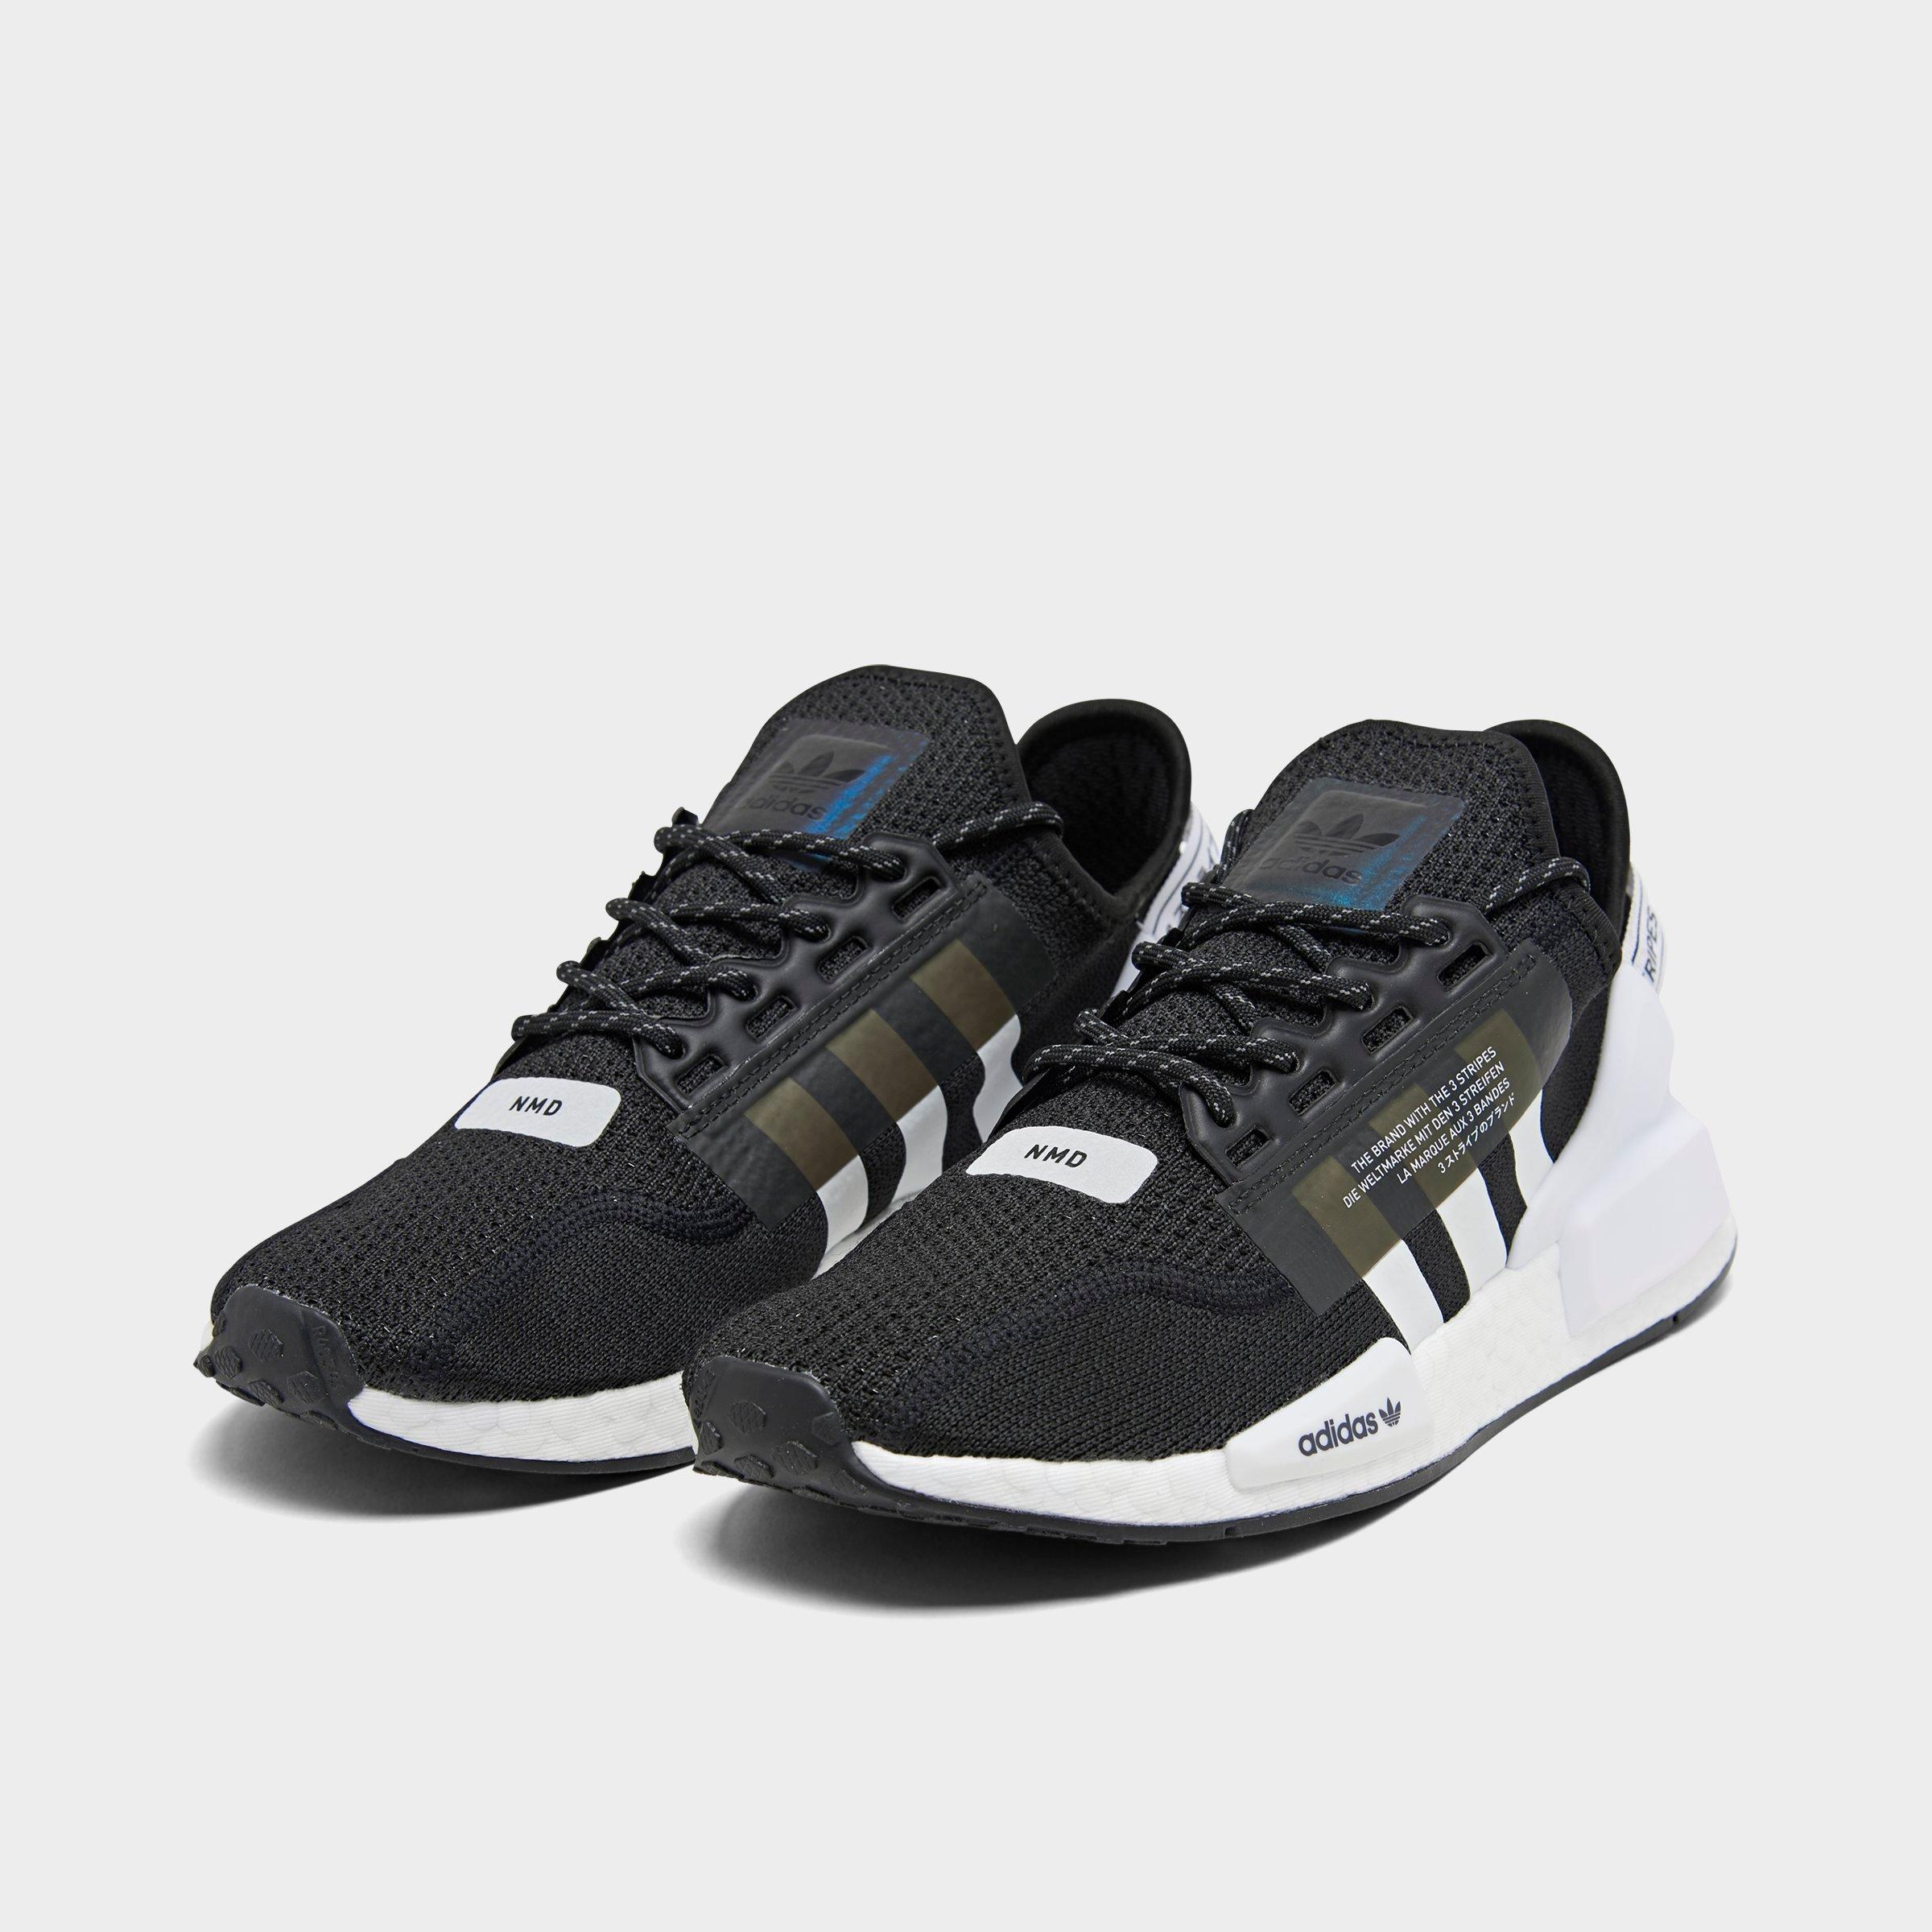 adidas mens NMD R1 Primeknit Casual Sneakers from